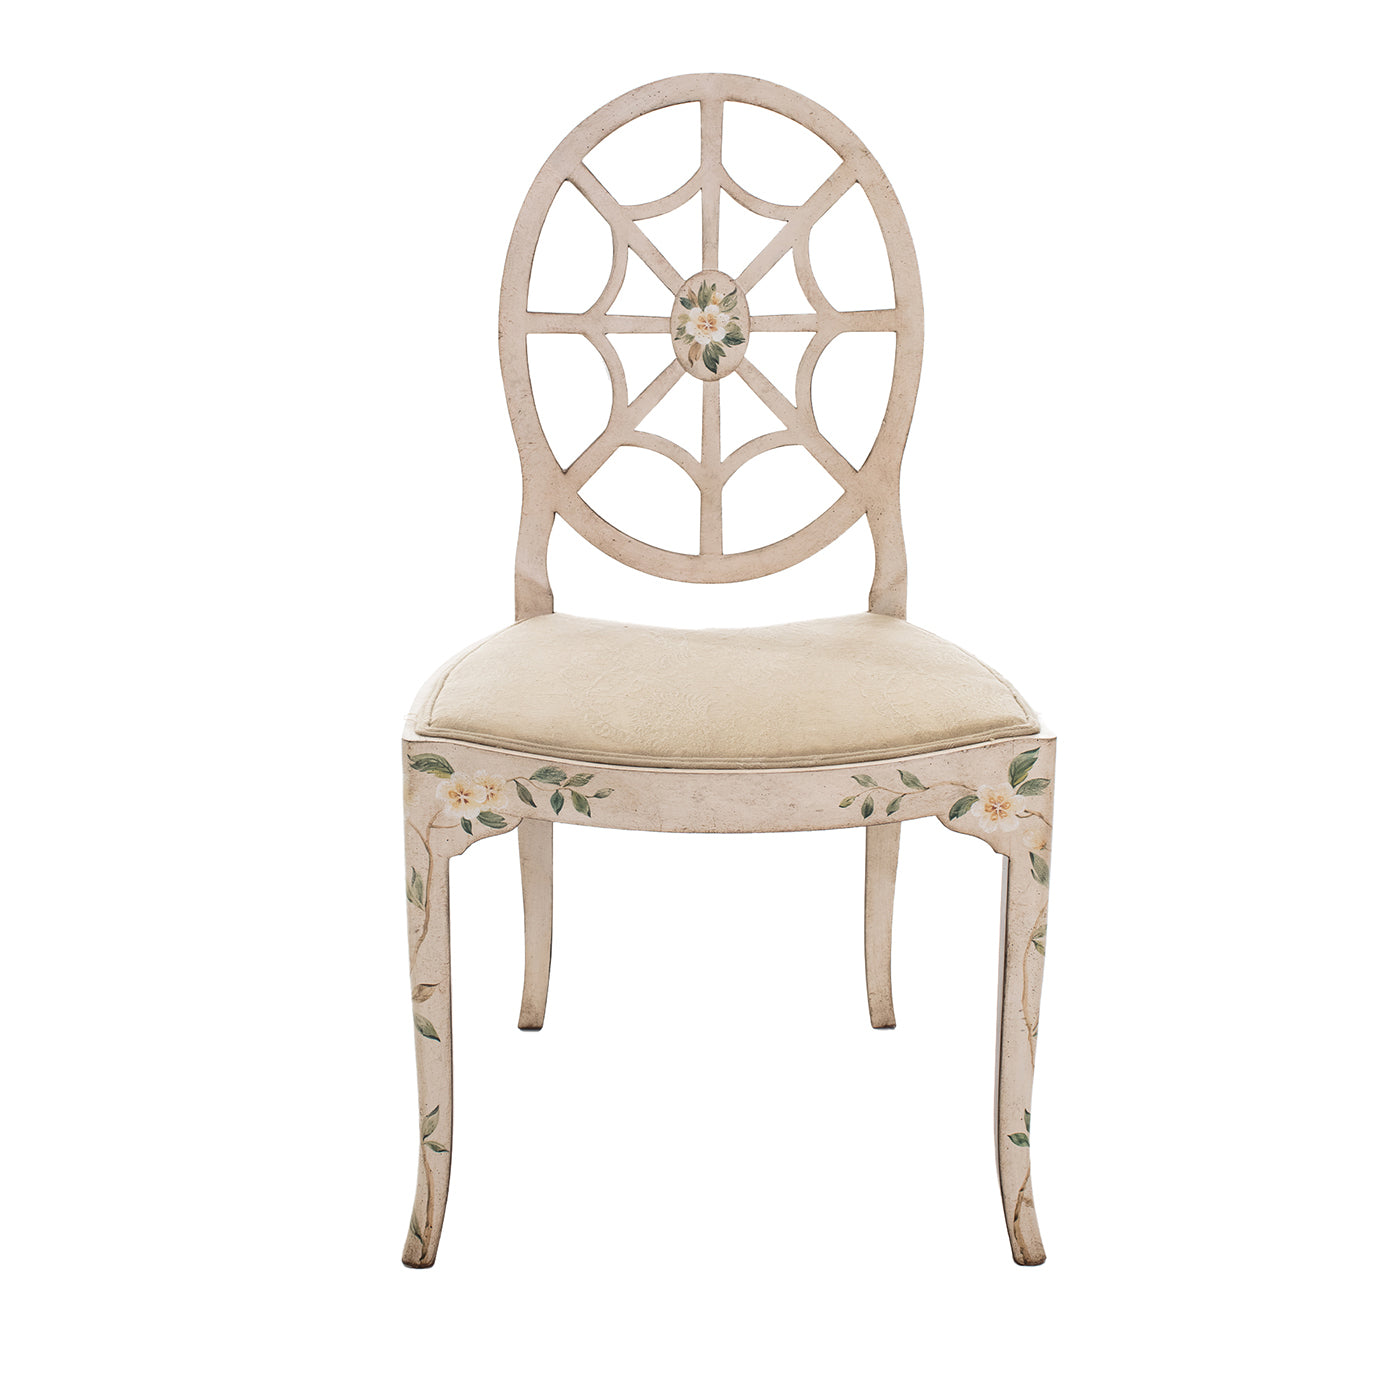 Aqulieia Brenches & Flowers Cream Dining Chair  - Main view